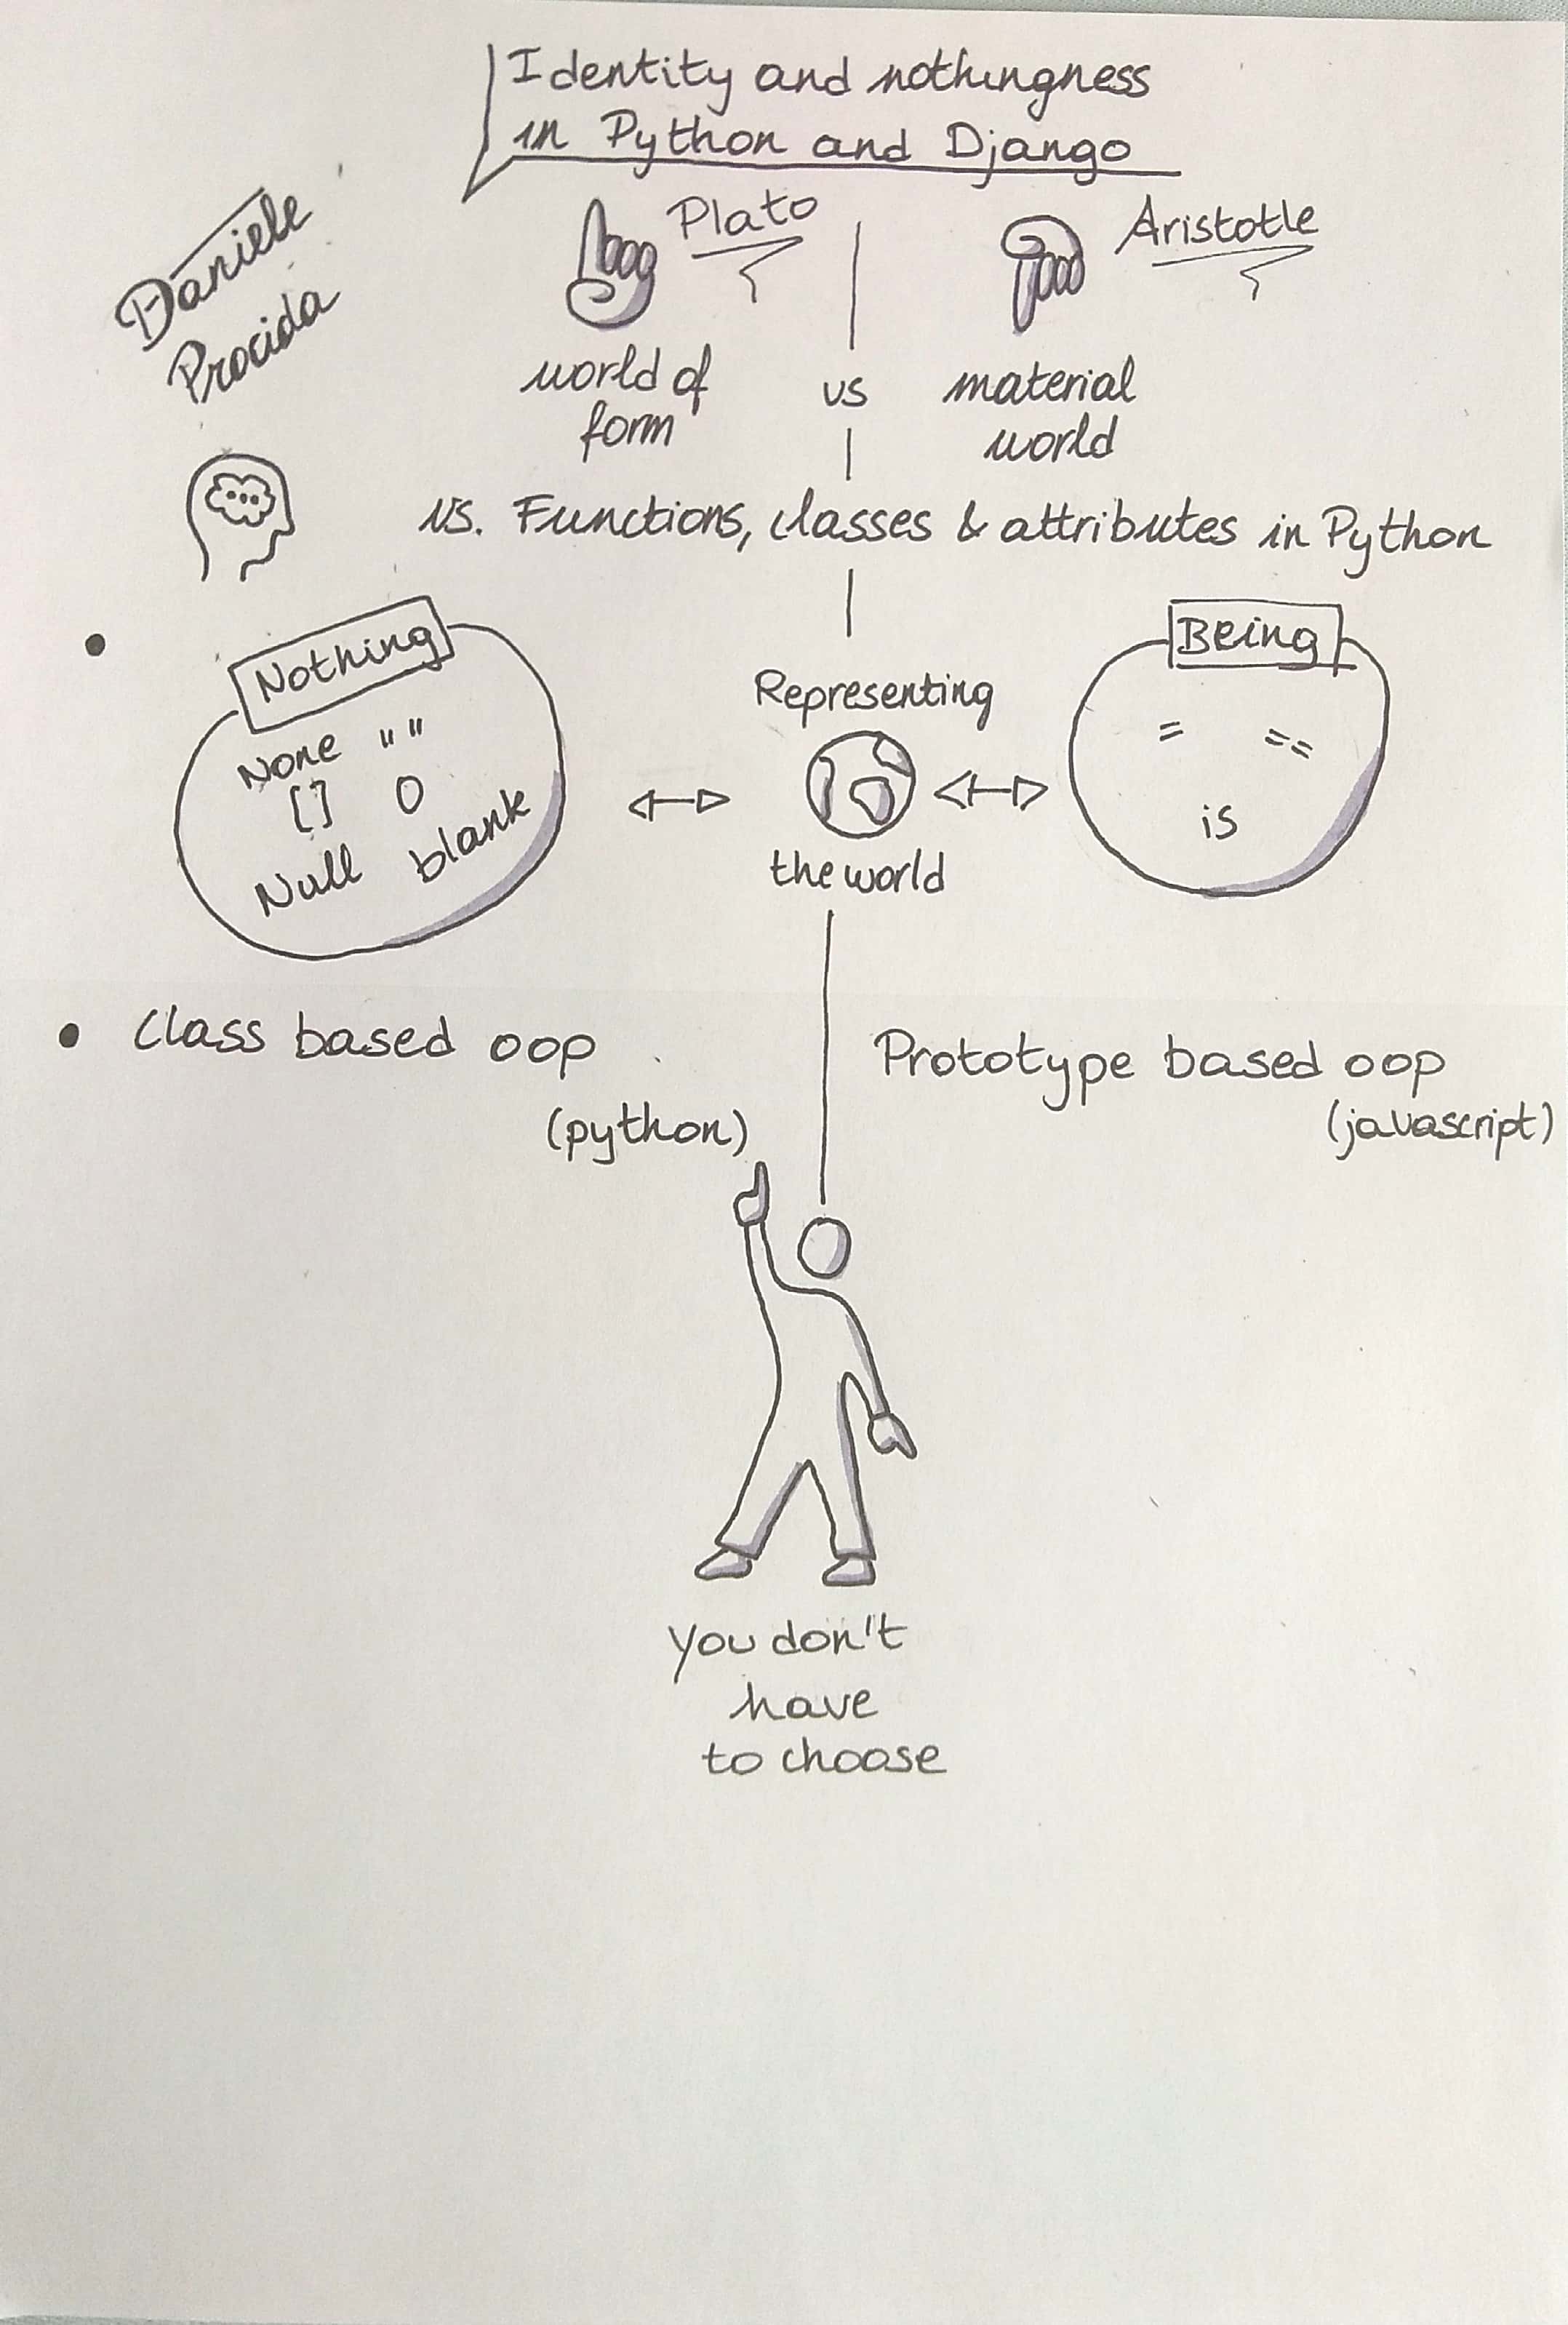 Sketchnote of Identity and nothingness in Python and Django